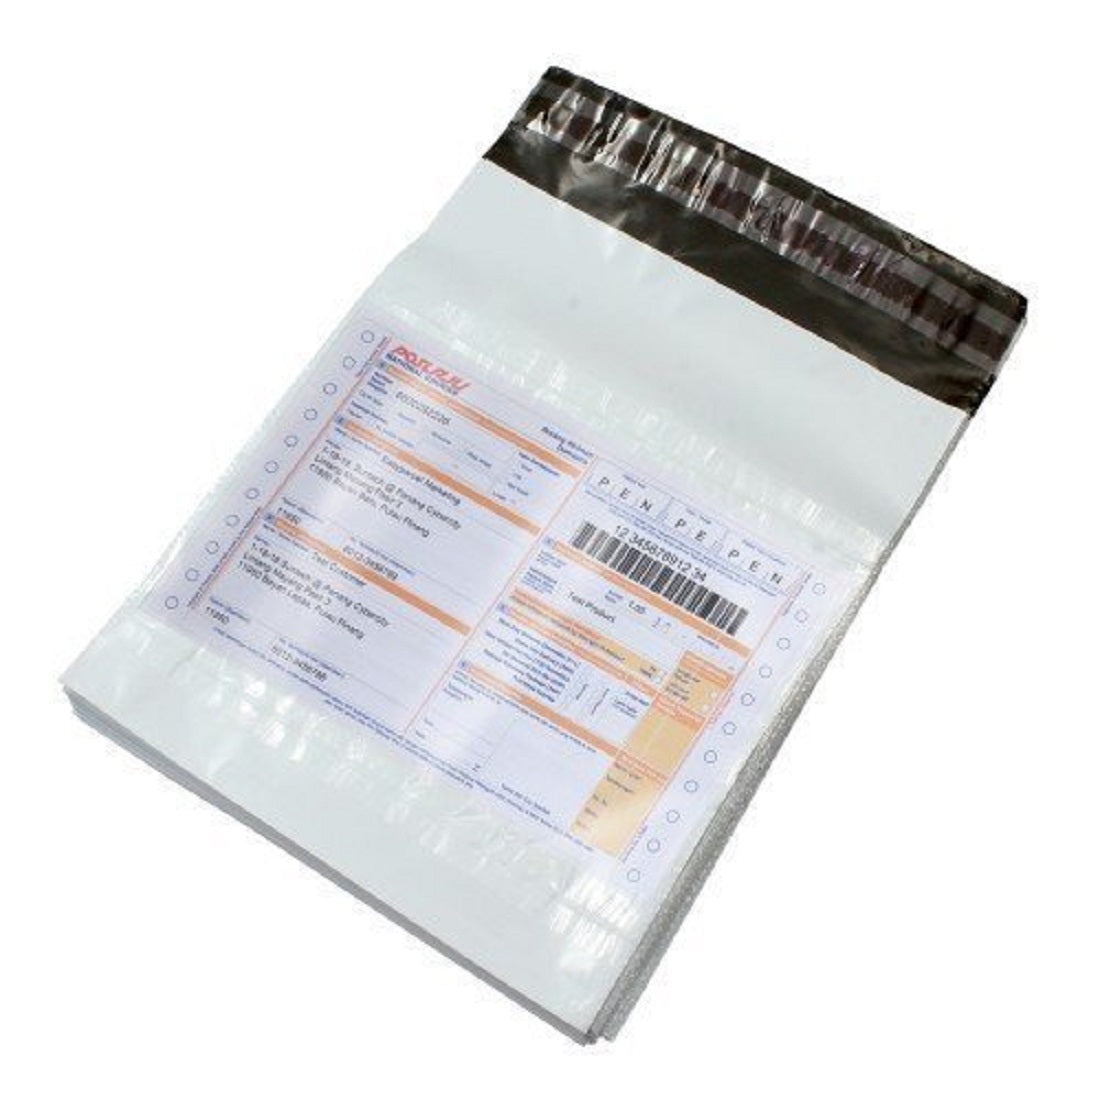 Courier Bags/Envelopes/Pouches/Cover 26X24 inches+ 2inch Flap  Pack of 100 Tamper Proof Plastic Polybags for Shipping/Packing (With POD)